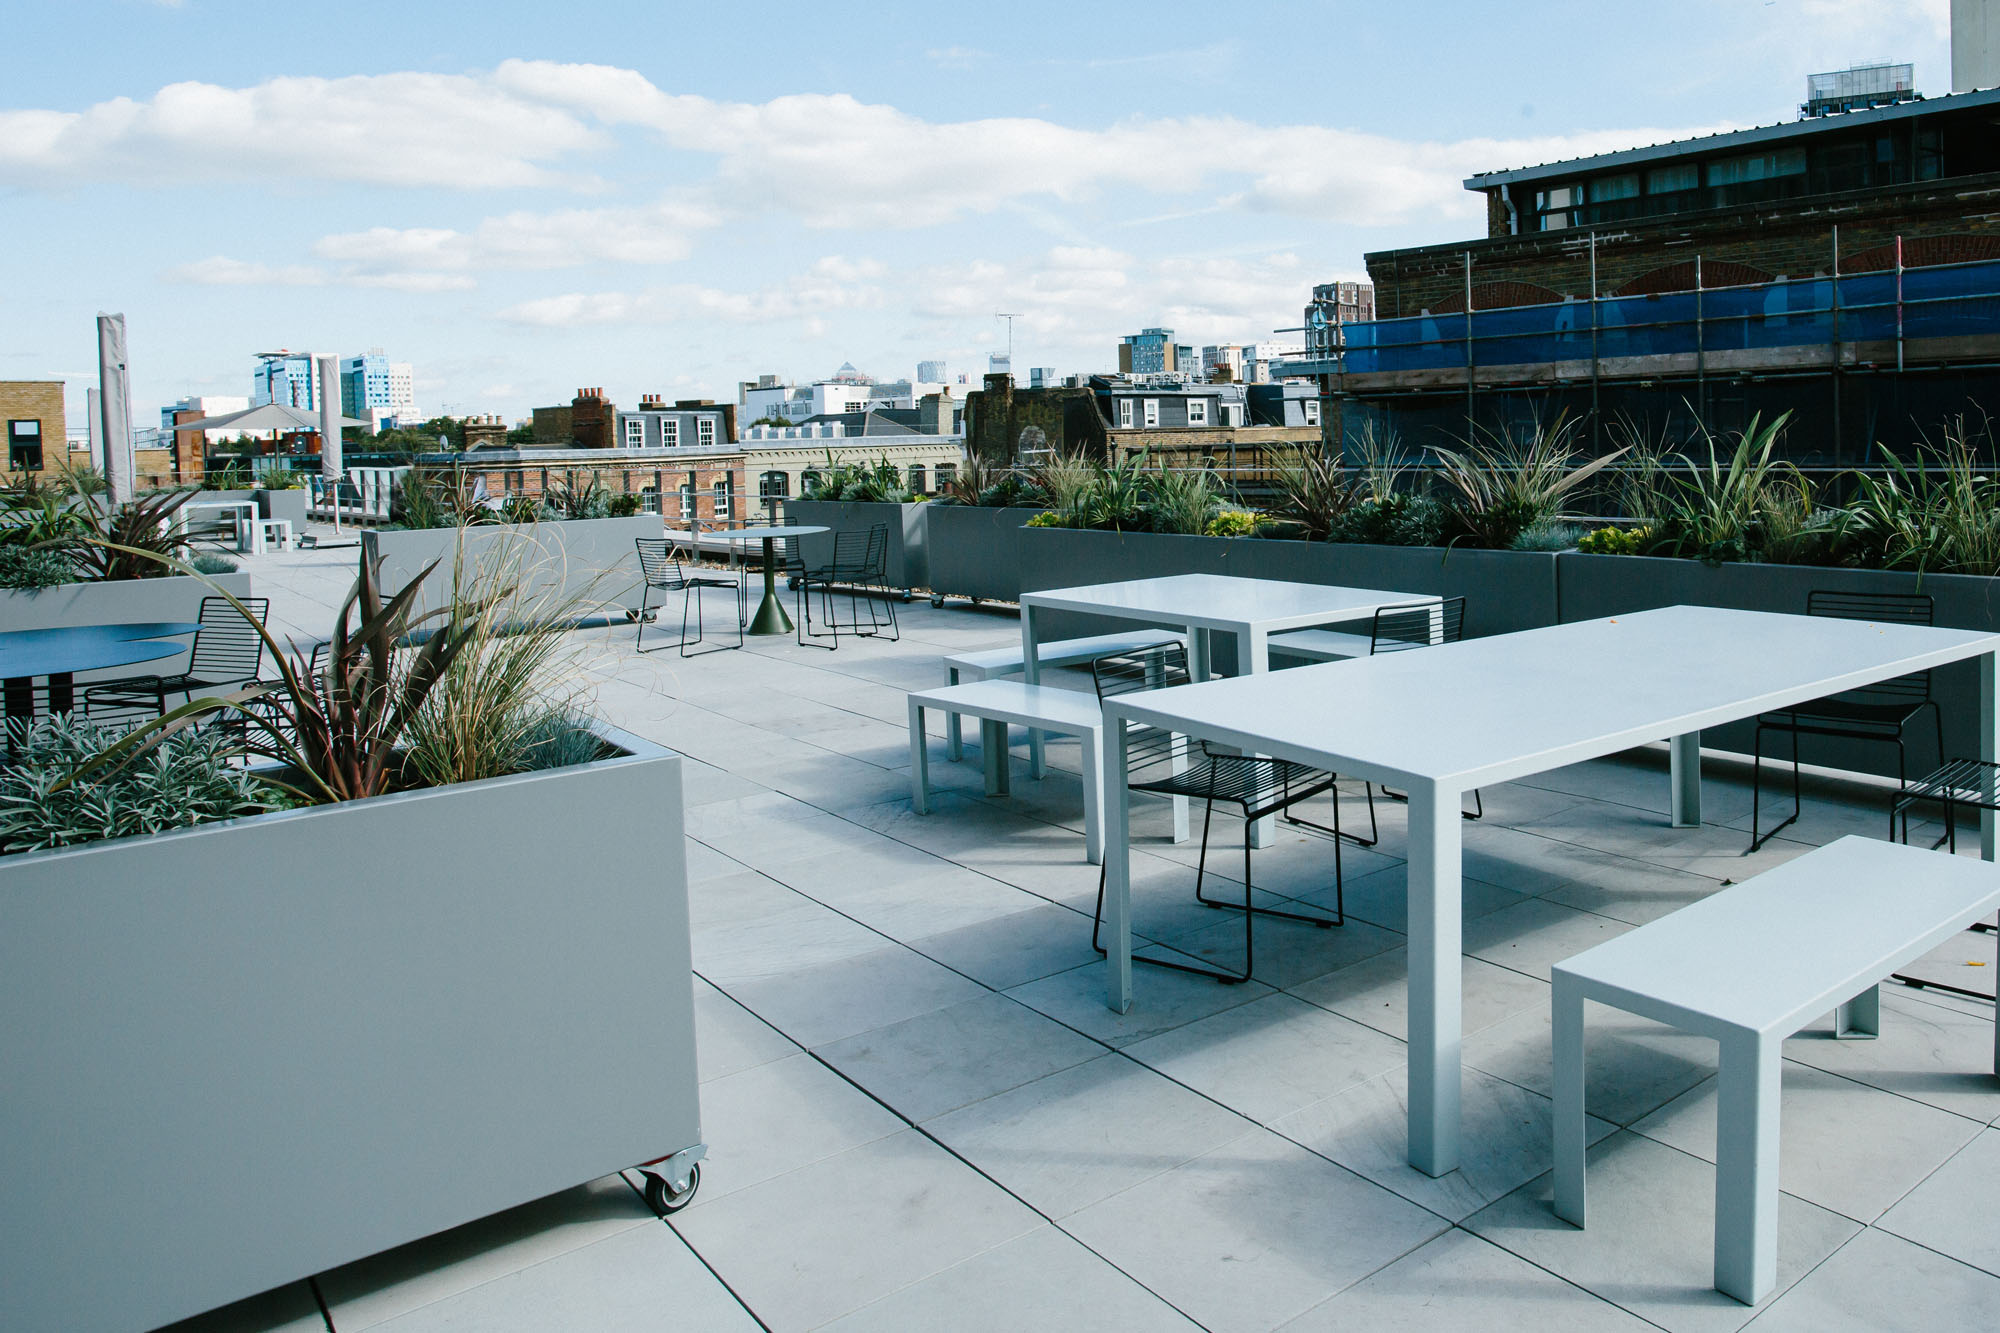 London roof gardens and urban landscaping